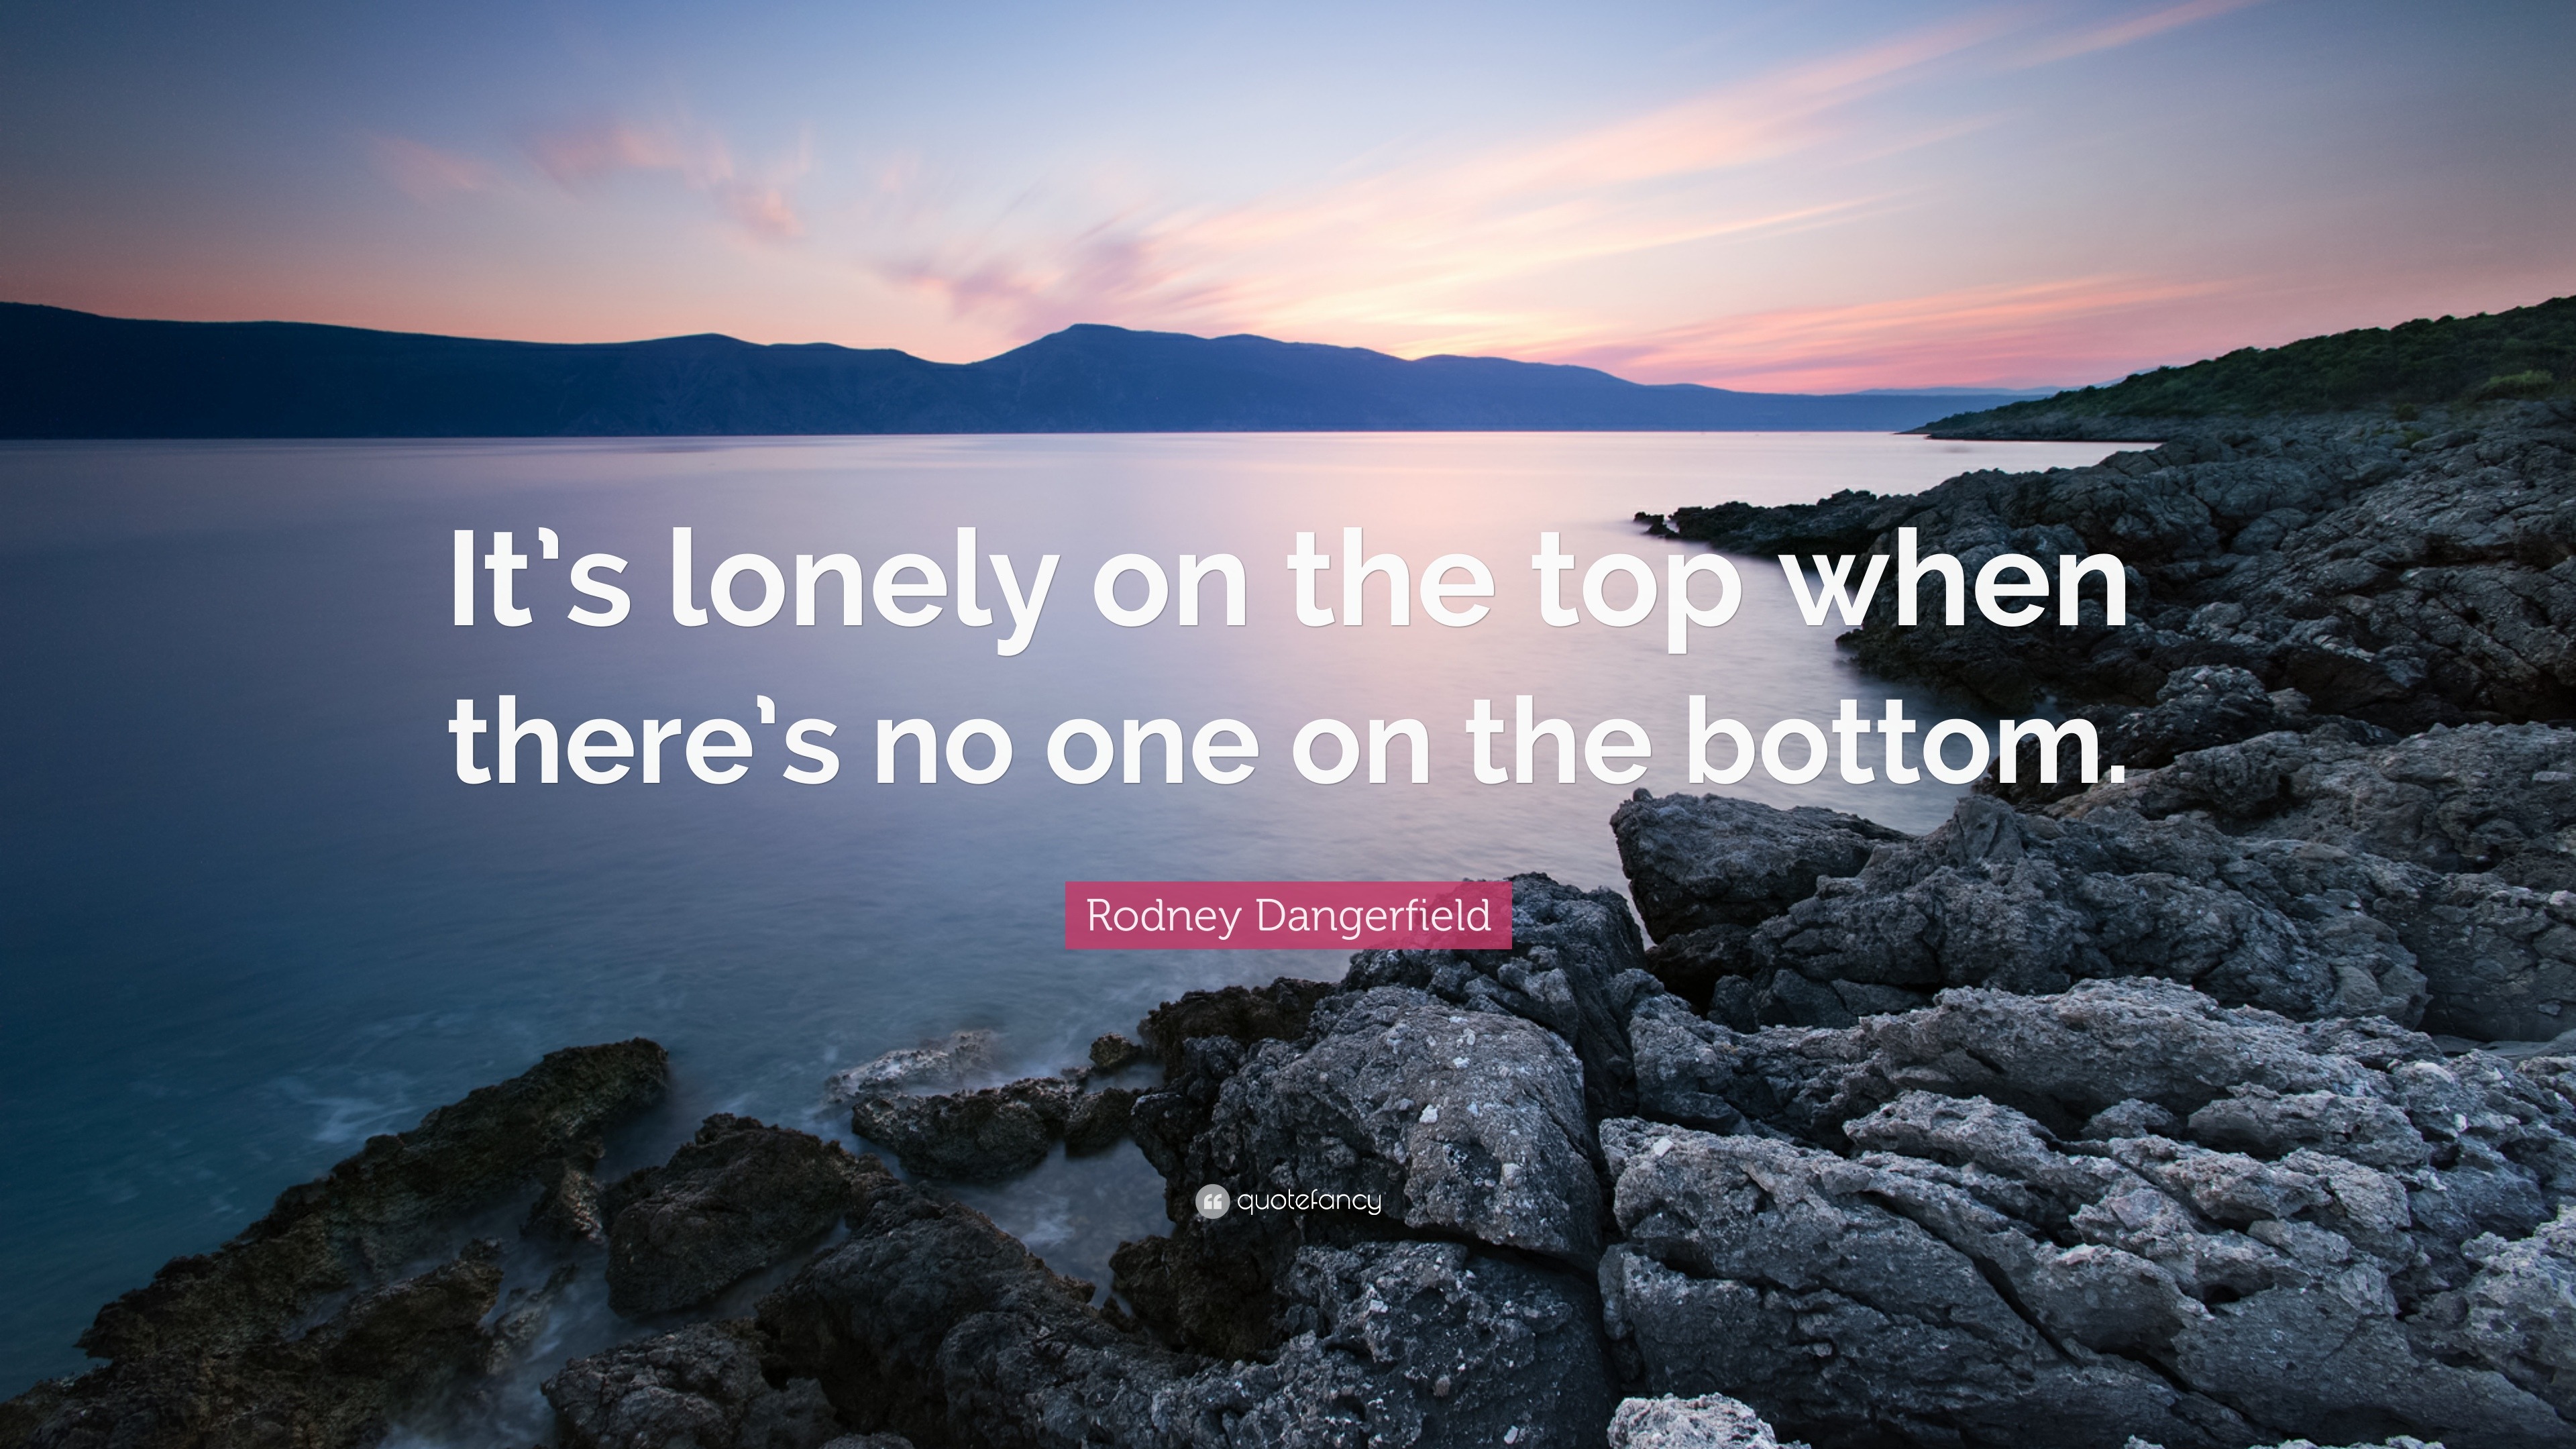 Rodney Dangerfield Quote: “It's lonely on top when there's no one the bottom.”